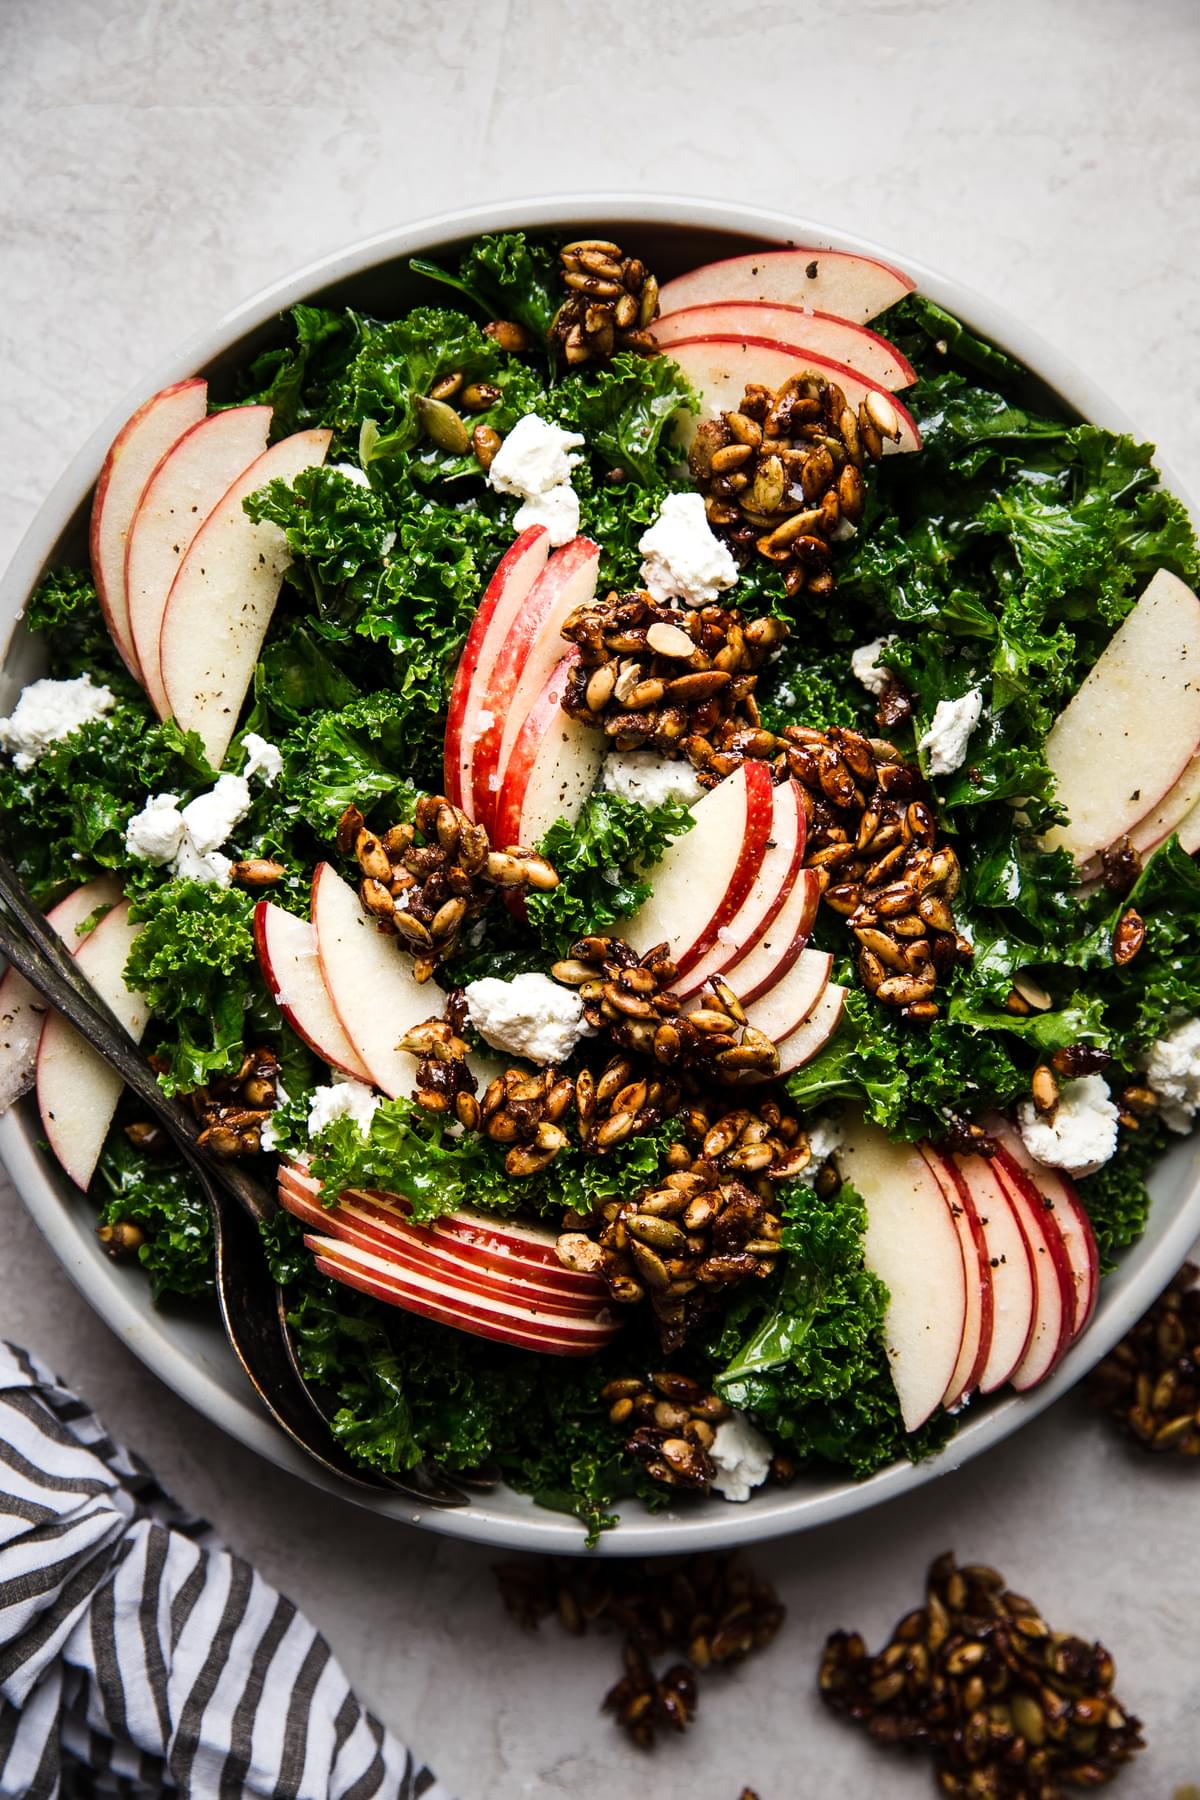 Kale Salad with Pumpkin Seed Clusters, apple slices, goat cheese and a creamy maple dressing in a bowl